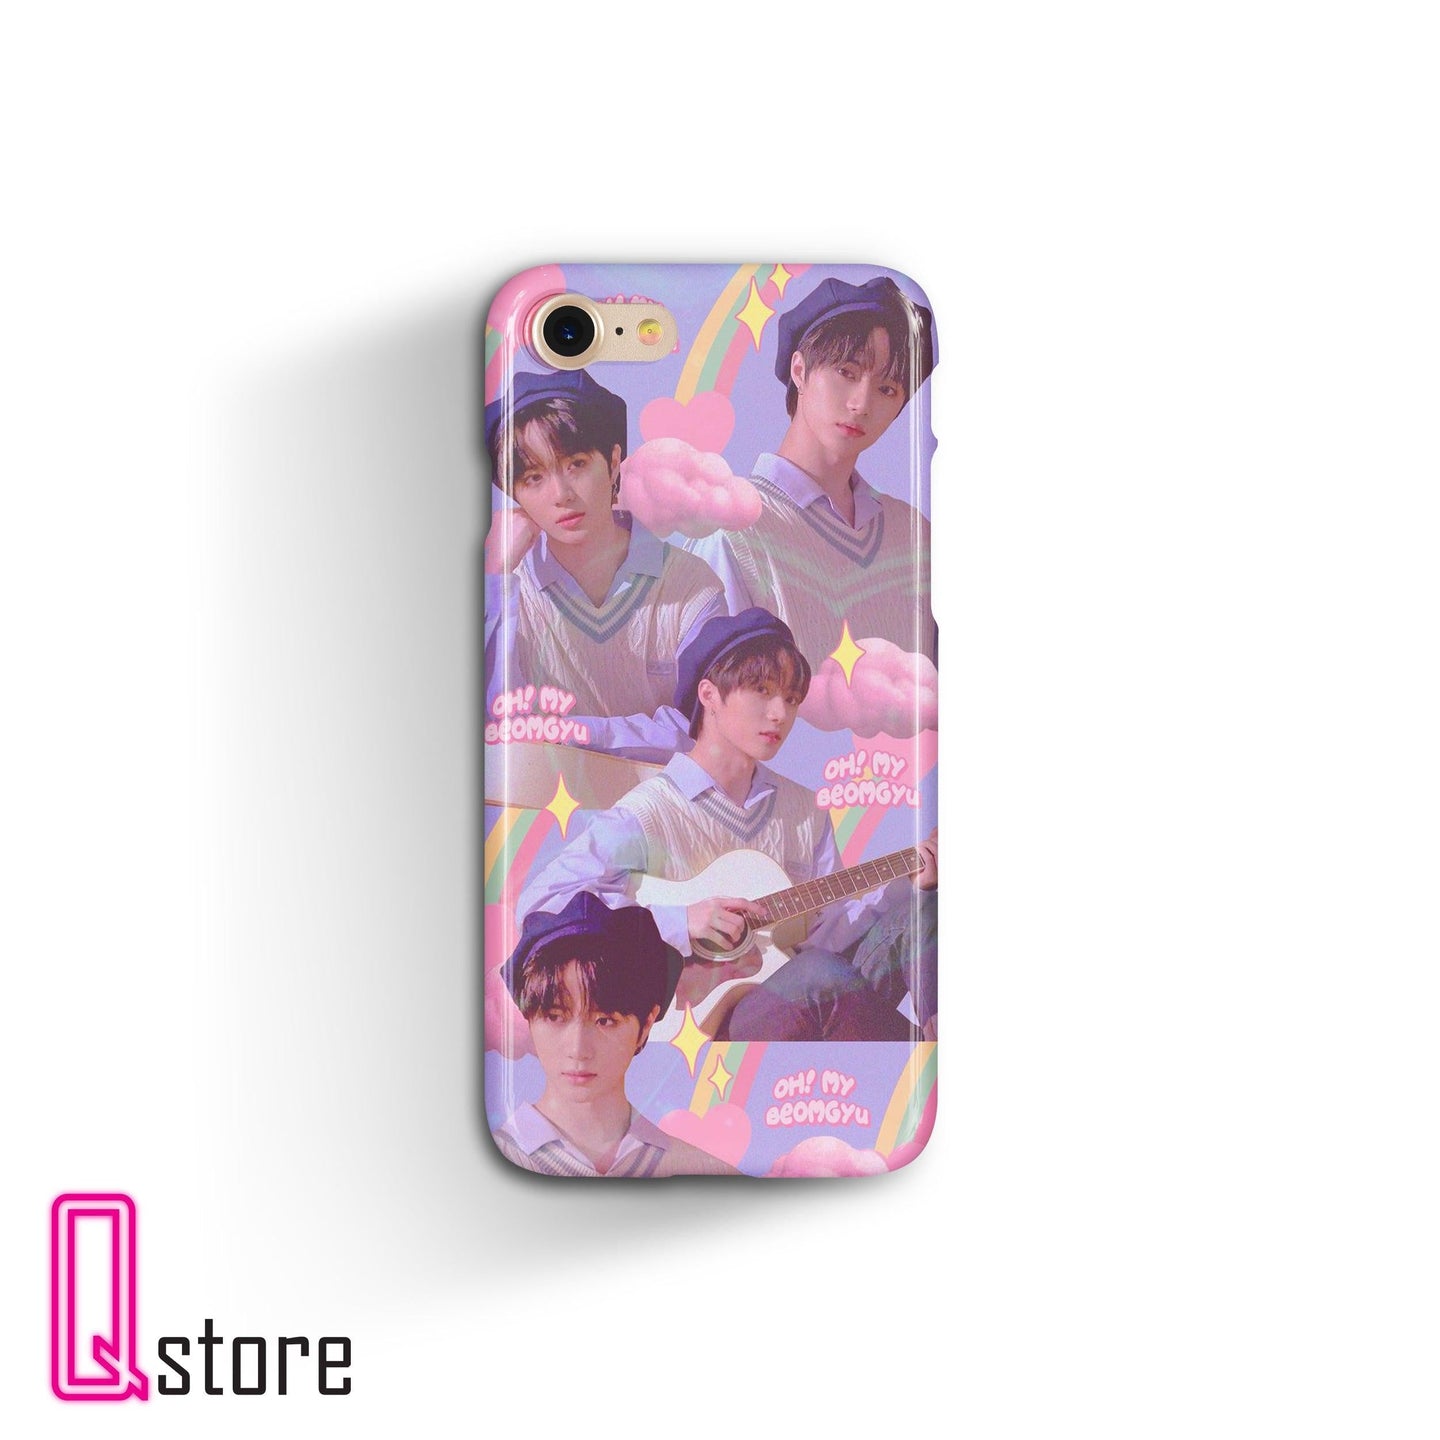 Bts.7 phone cover - Qcase Store | Everyday Case